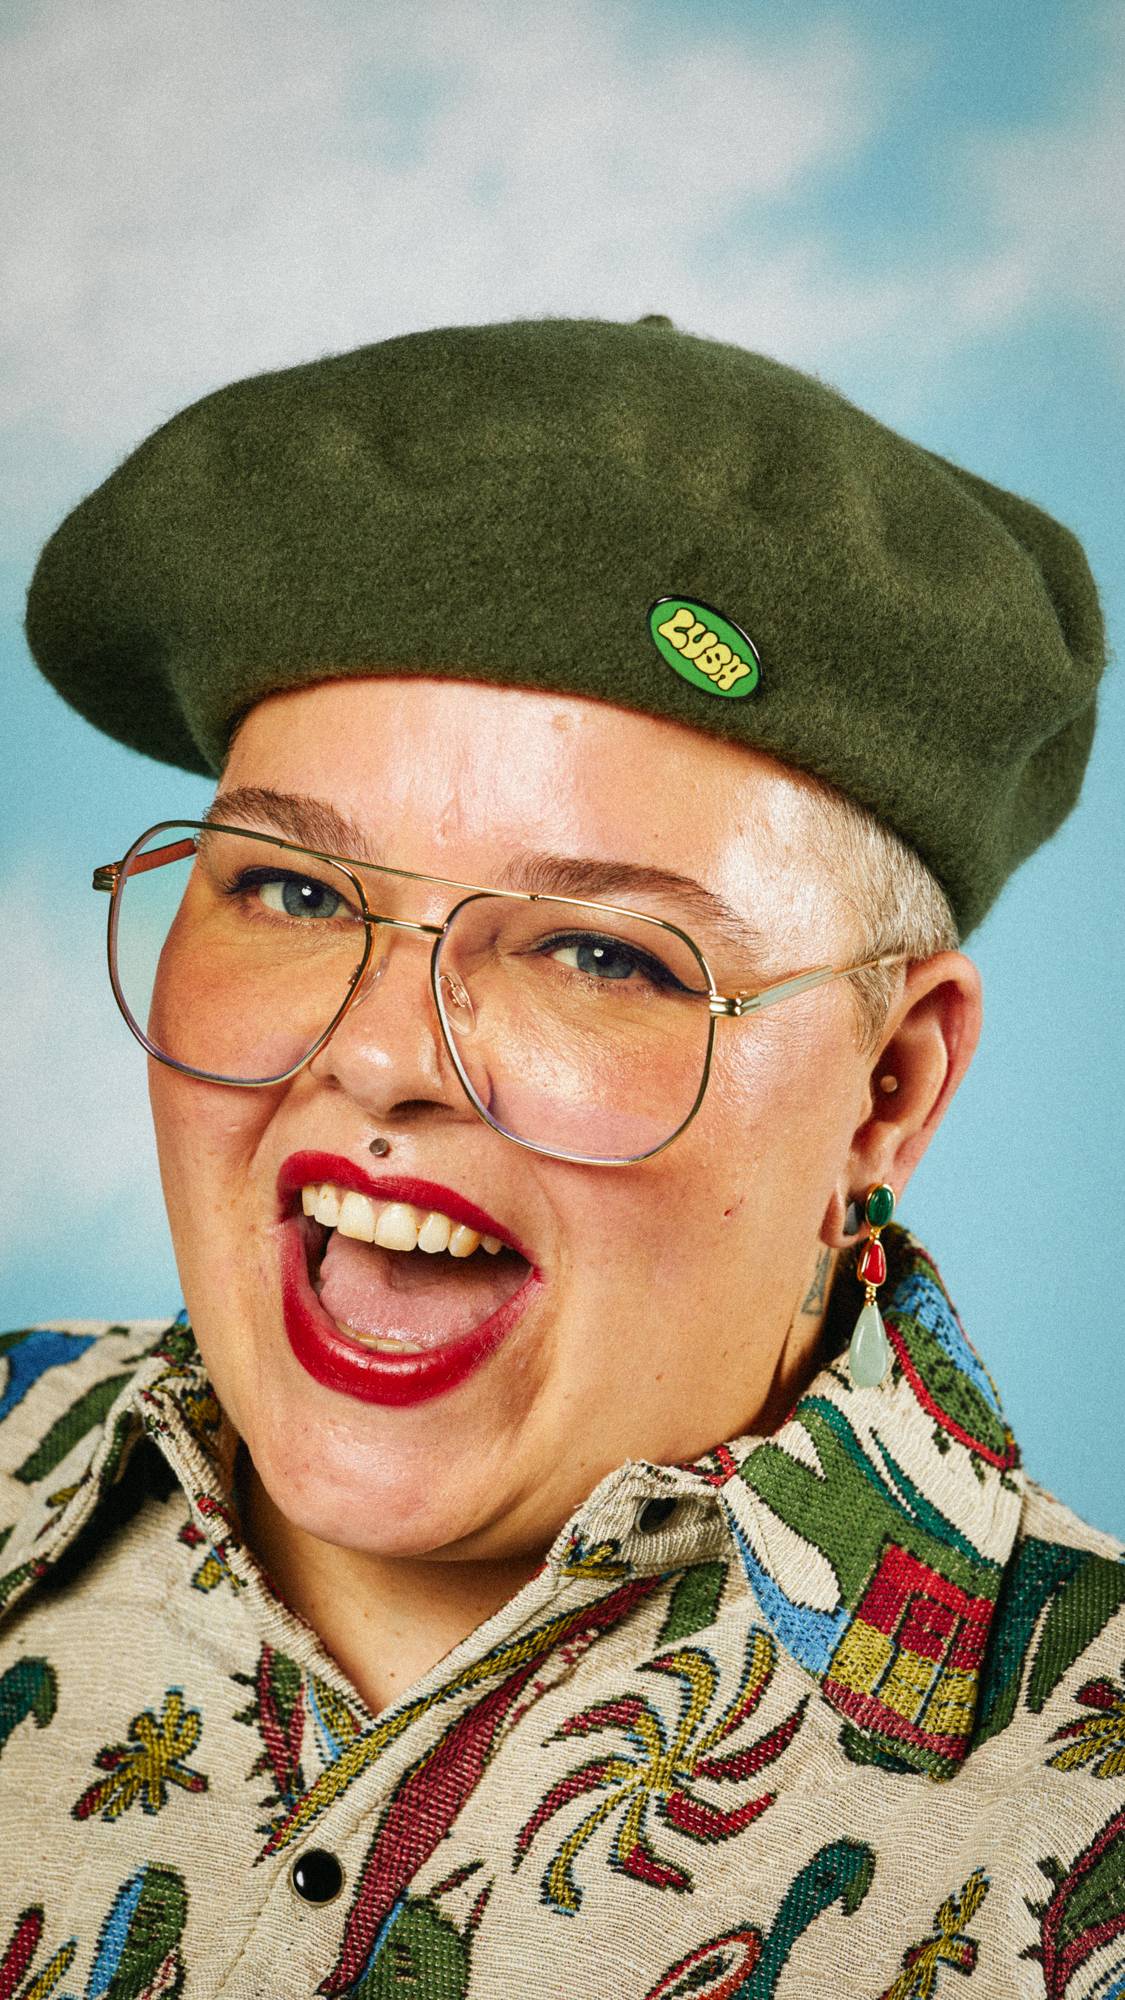 Model is wearing a bold shirt with glasses and a green beret hat with a Retro Bubble Lush pin badge attached to the front. 